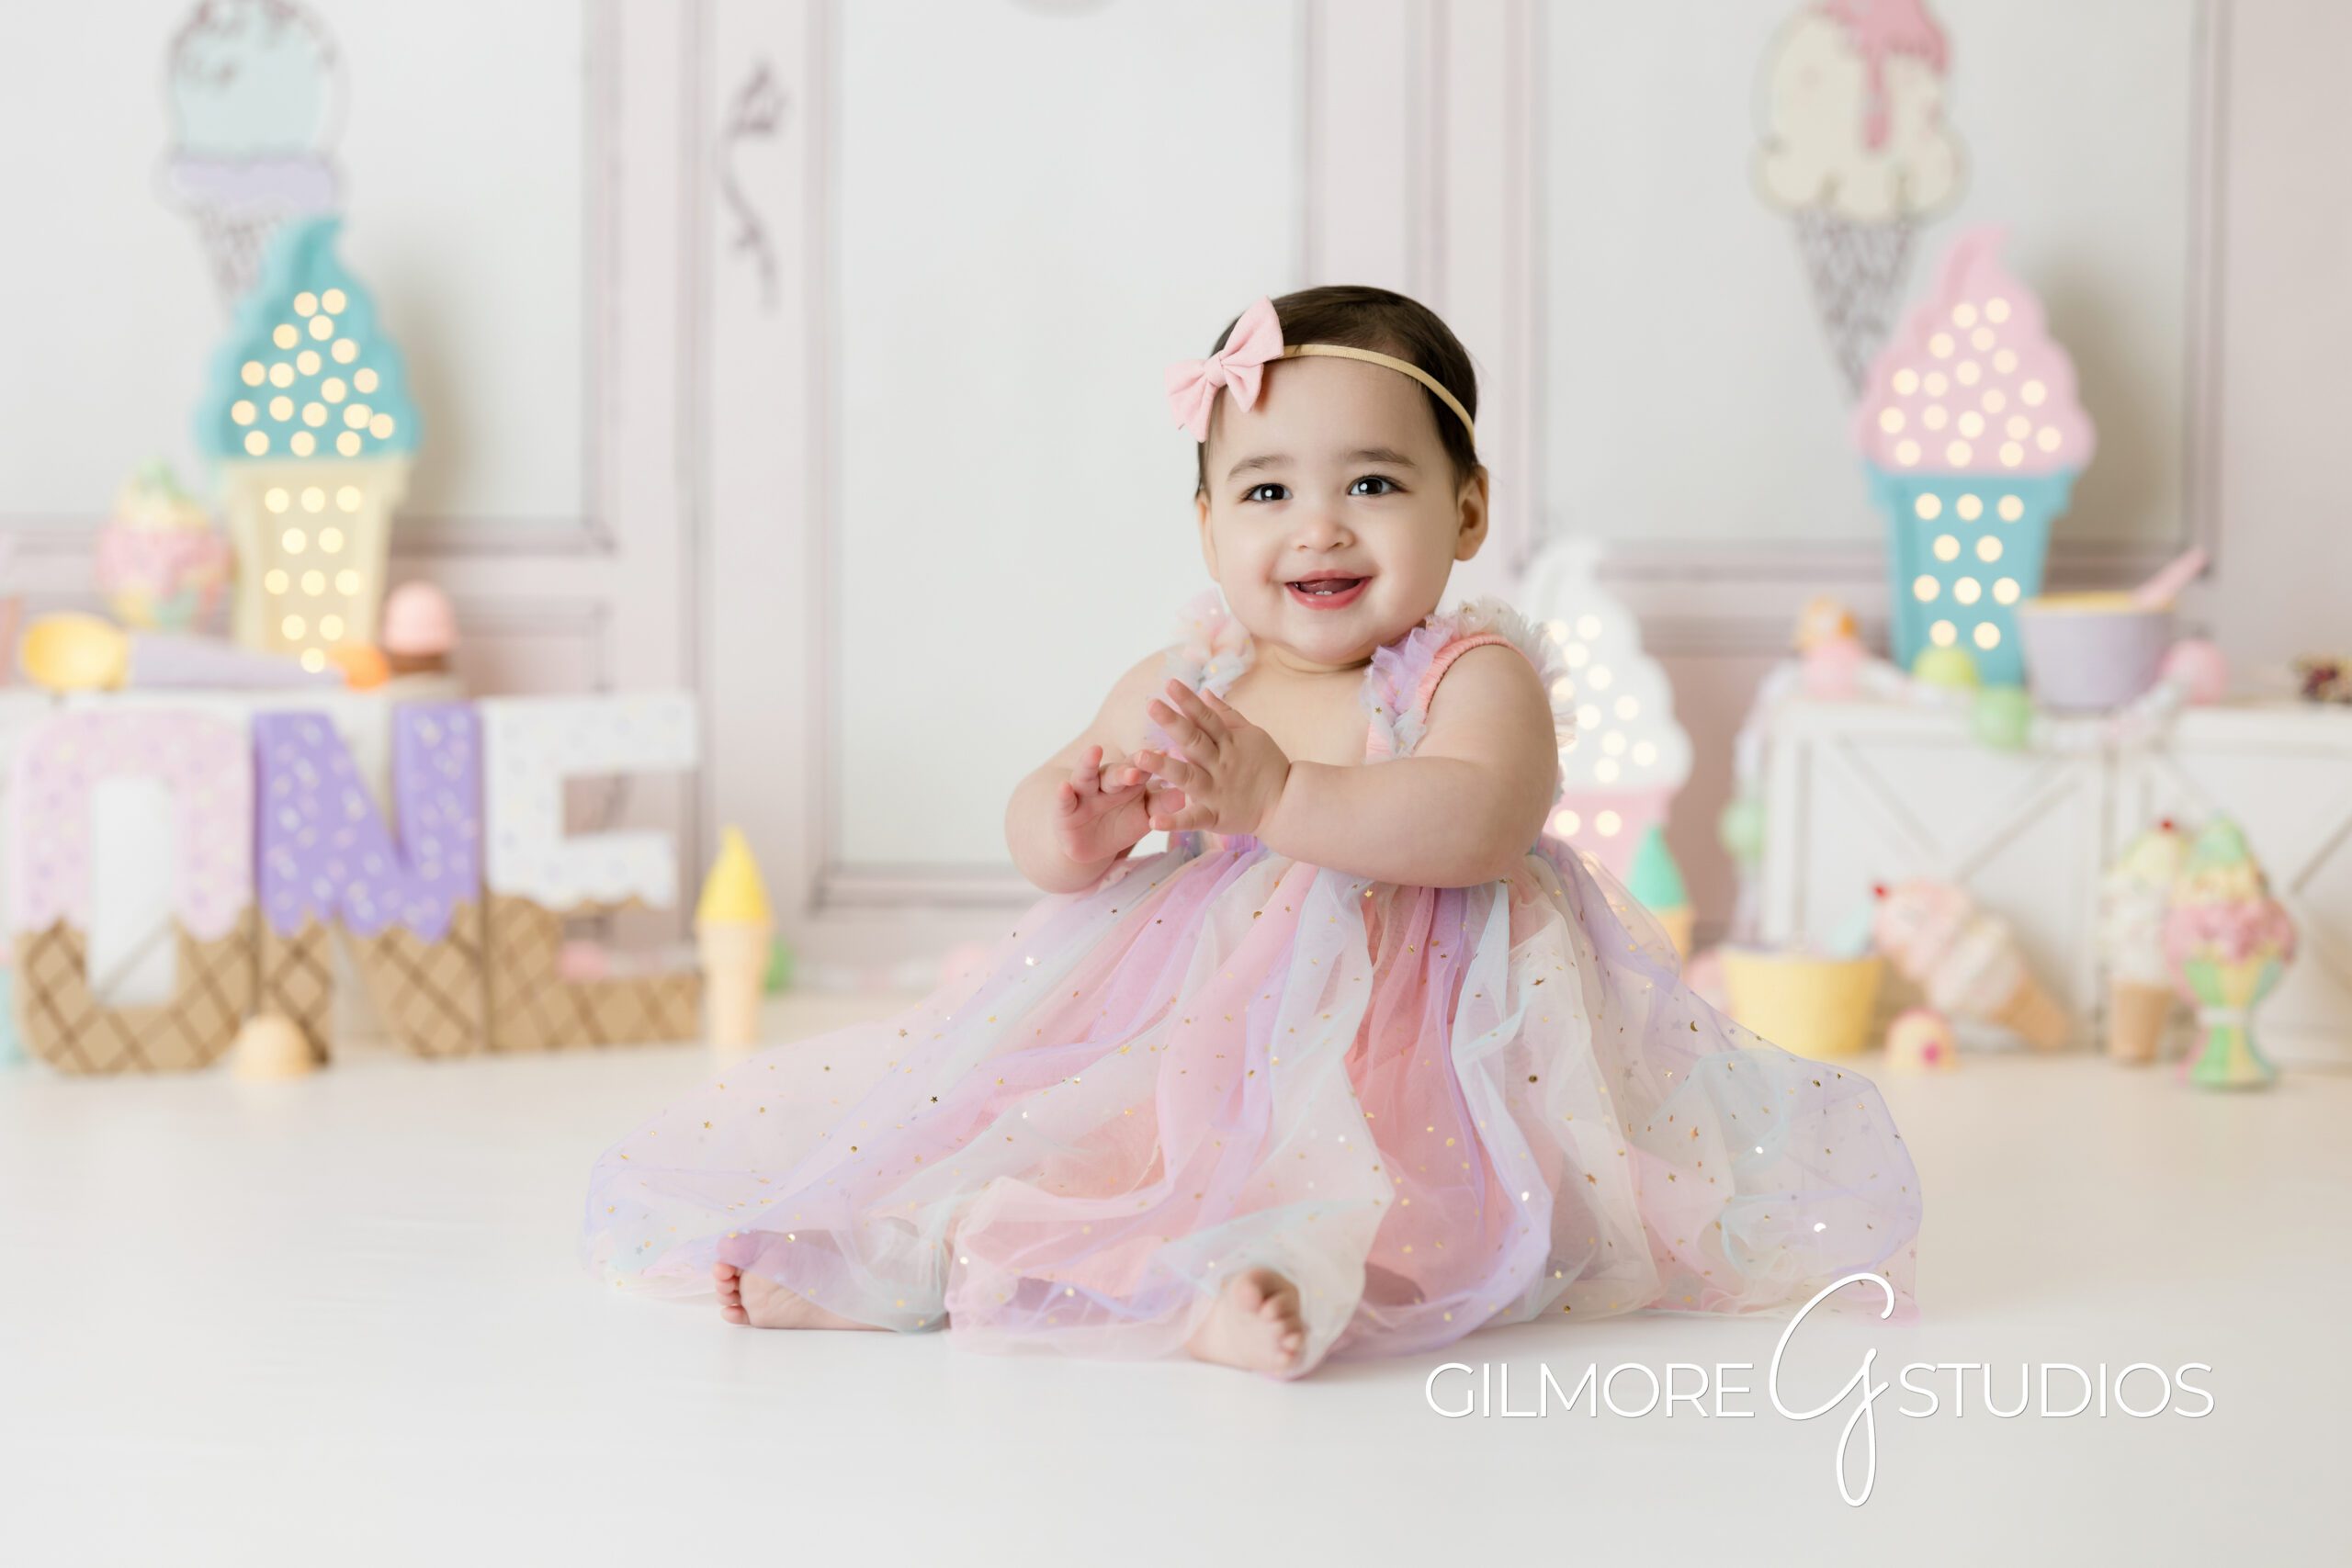 ice cream themed cake Smash, little girl, pink bow, pink dress, clapping, sitting up, cake Smash, Gilmore Studios